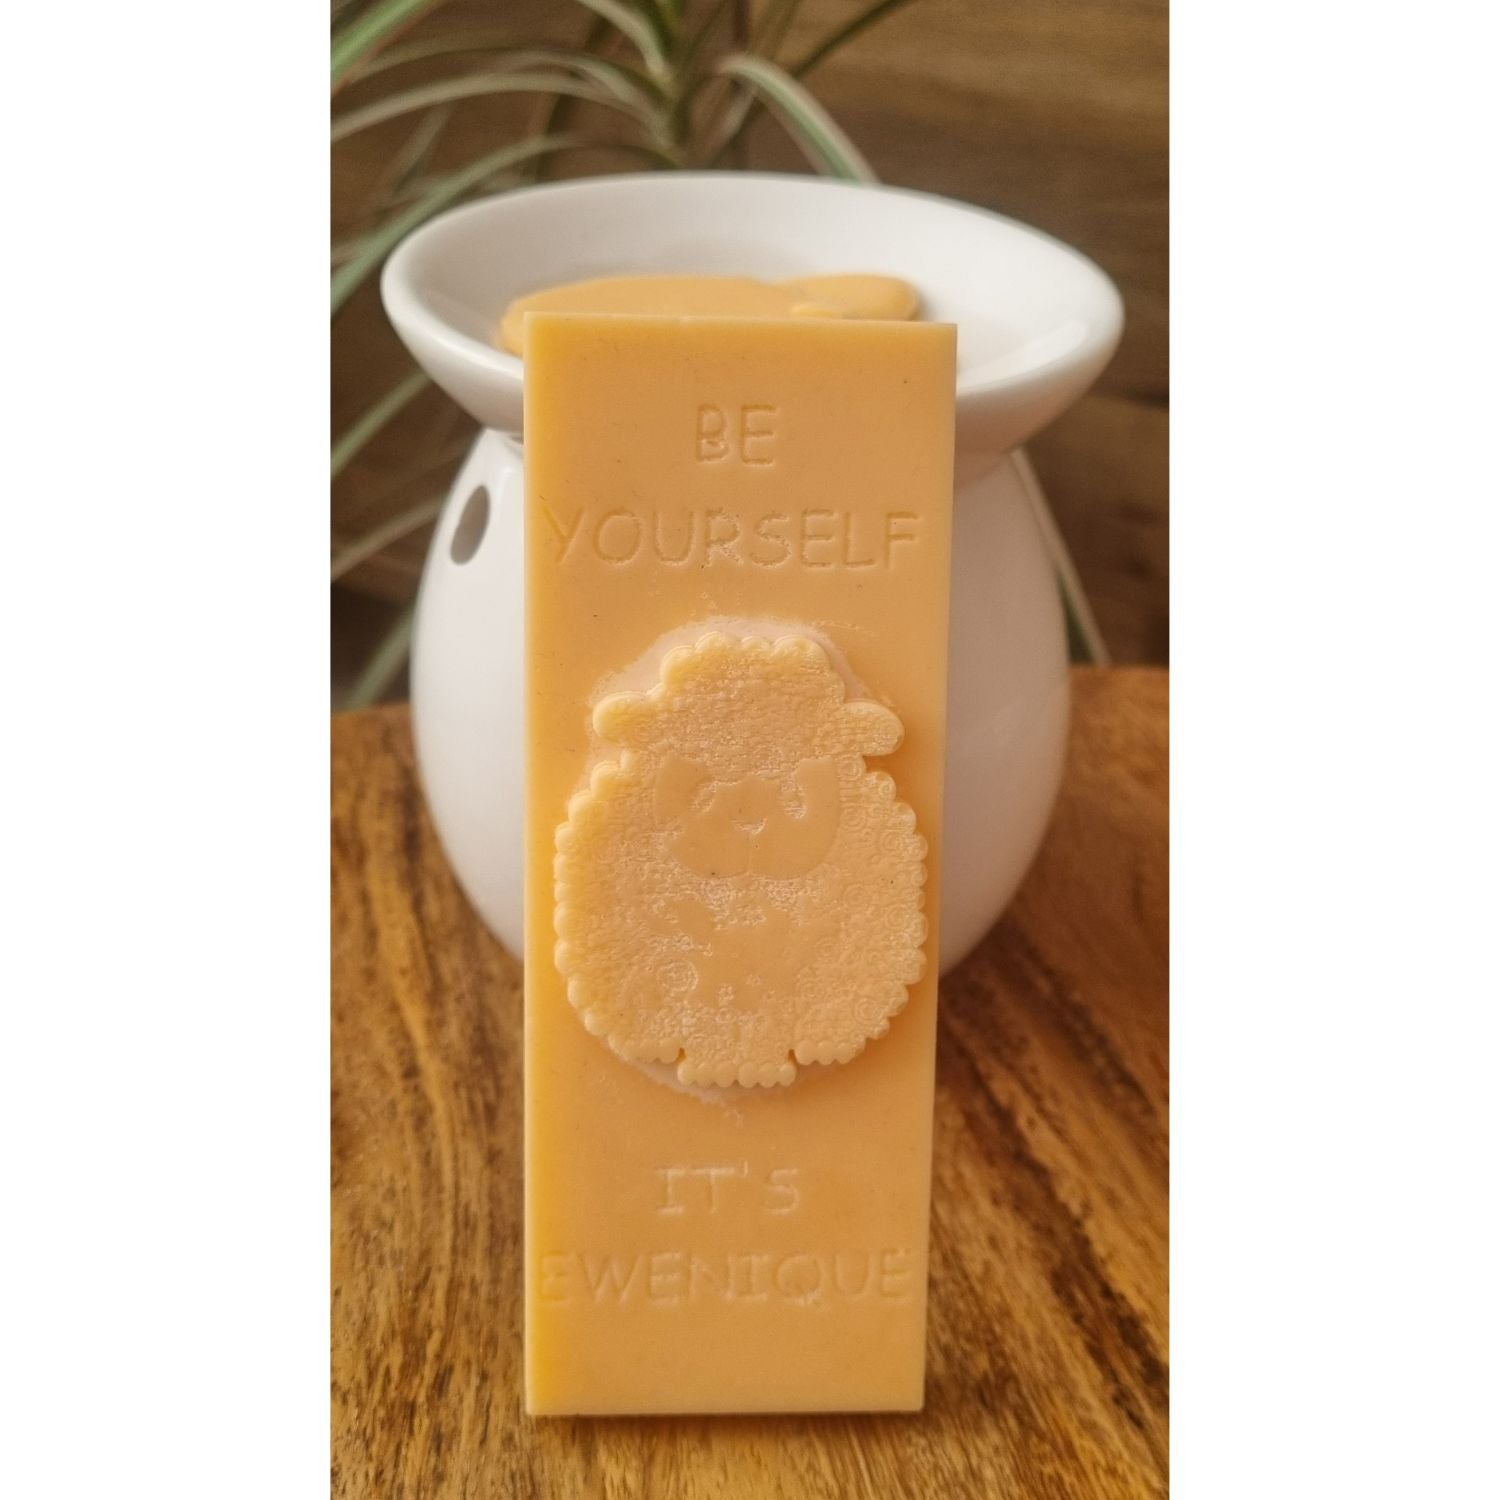 An orange coloured rectangle of wax with a raised sheep design with the writing be yourself above and it's ewenique below. The bar is leaning against a white ceramic wax melter on a wooden table.